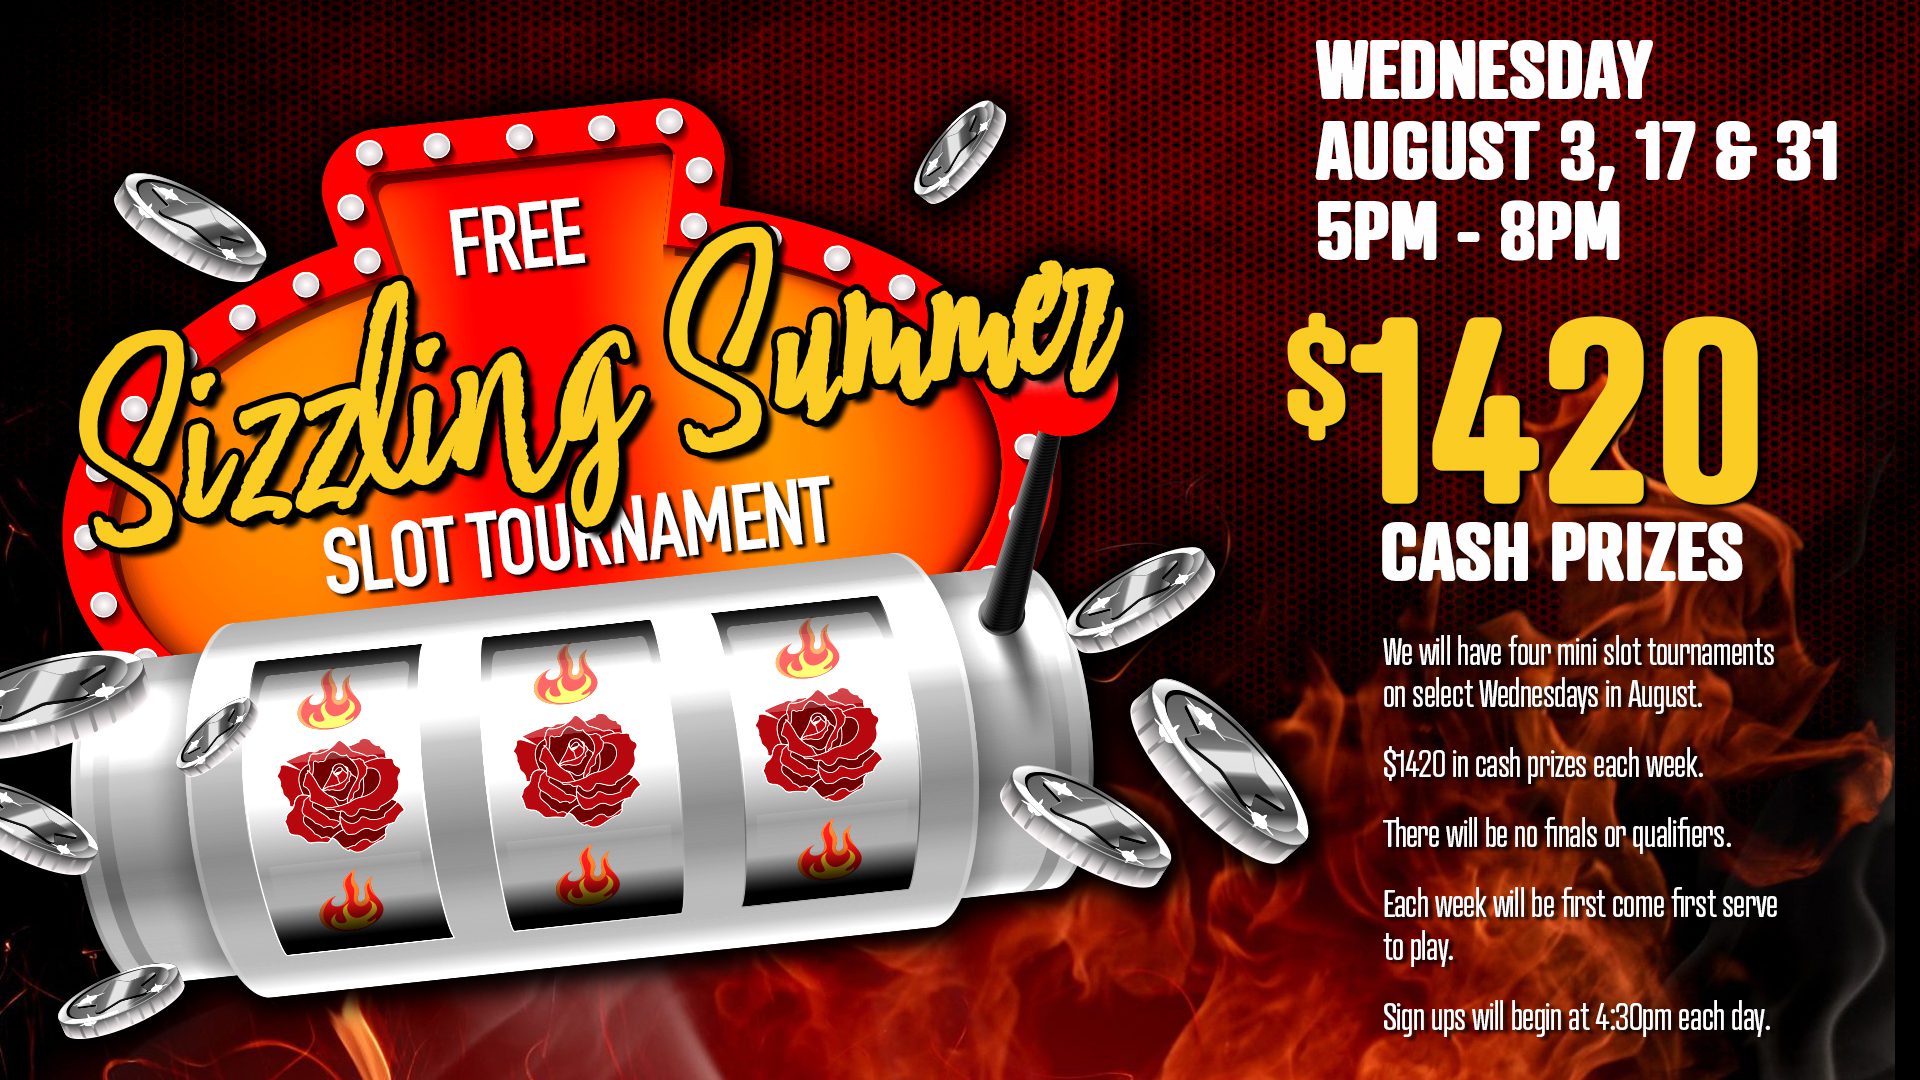 Promotional graphic for a "sizzling summer slot tournament" event with $1420 cash prizes, happening on wednesdays in august from 5 pm to 8 pm.